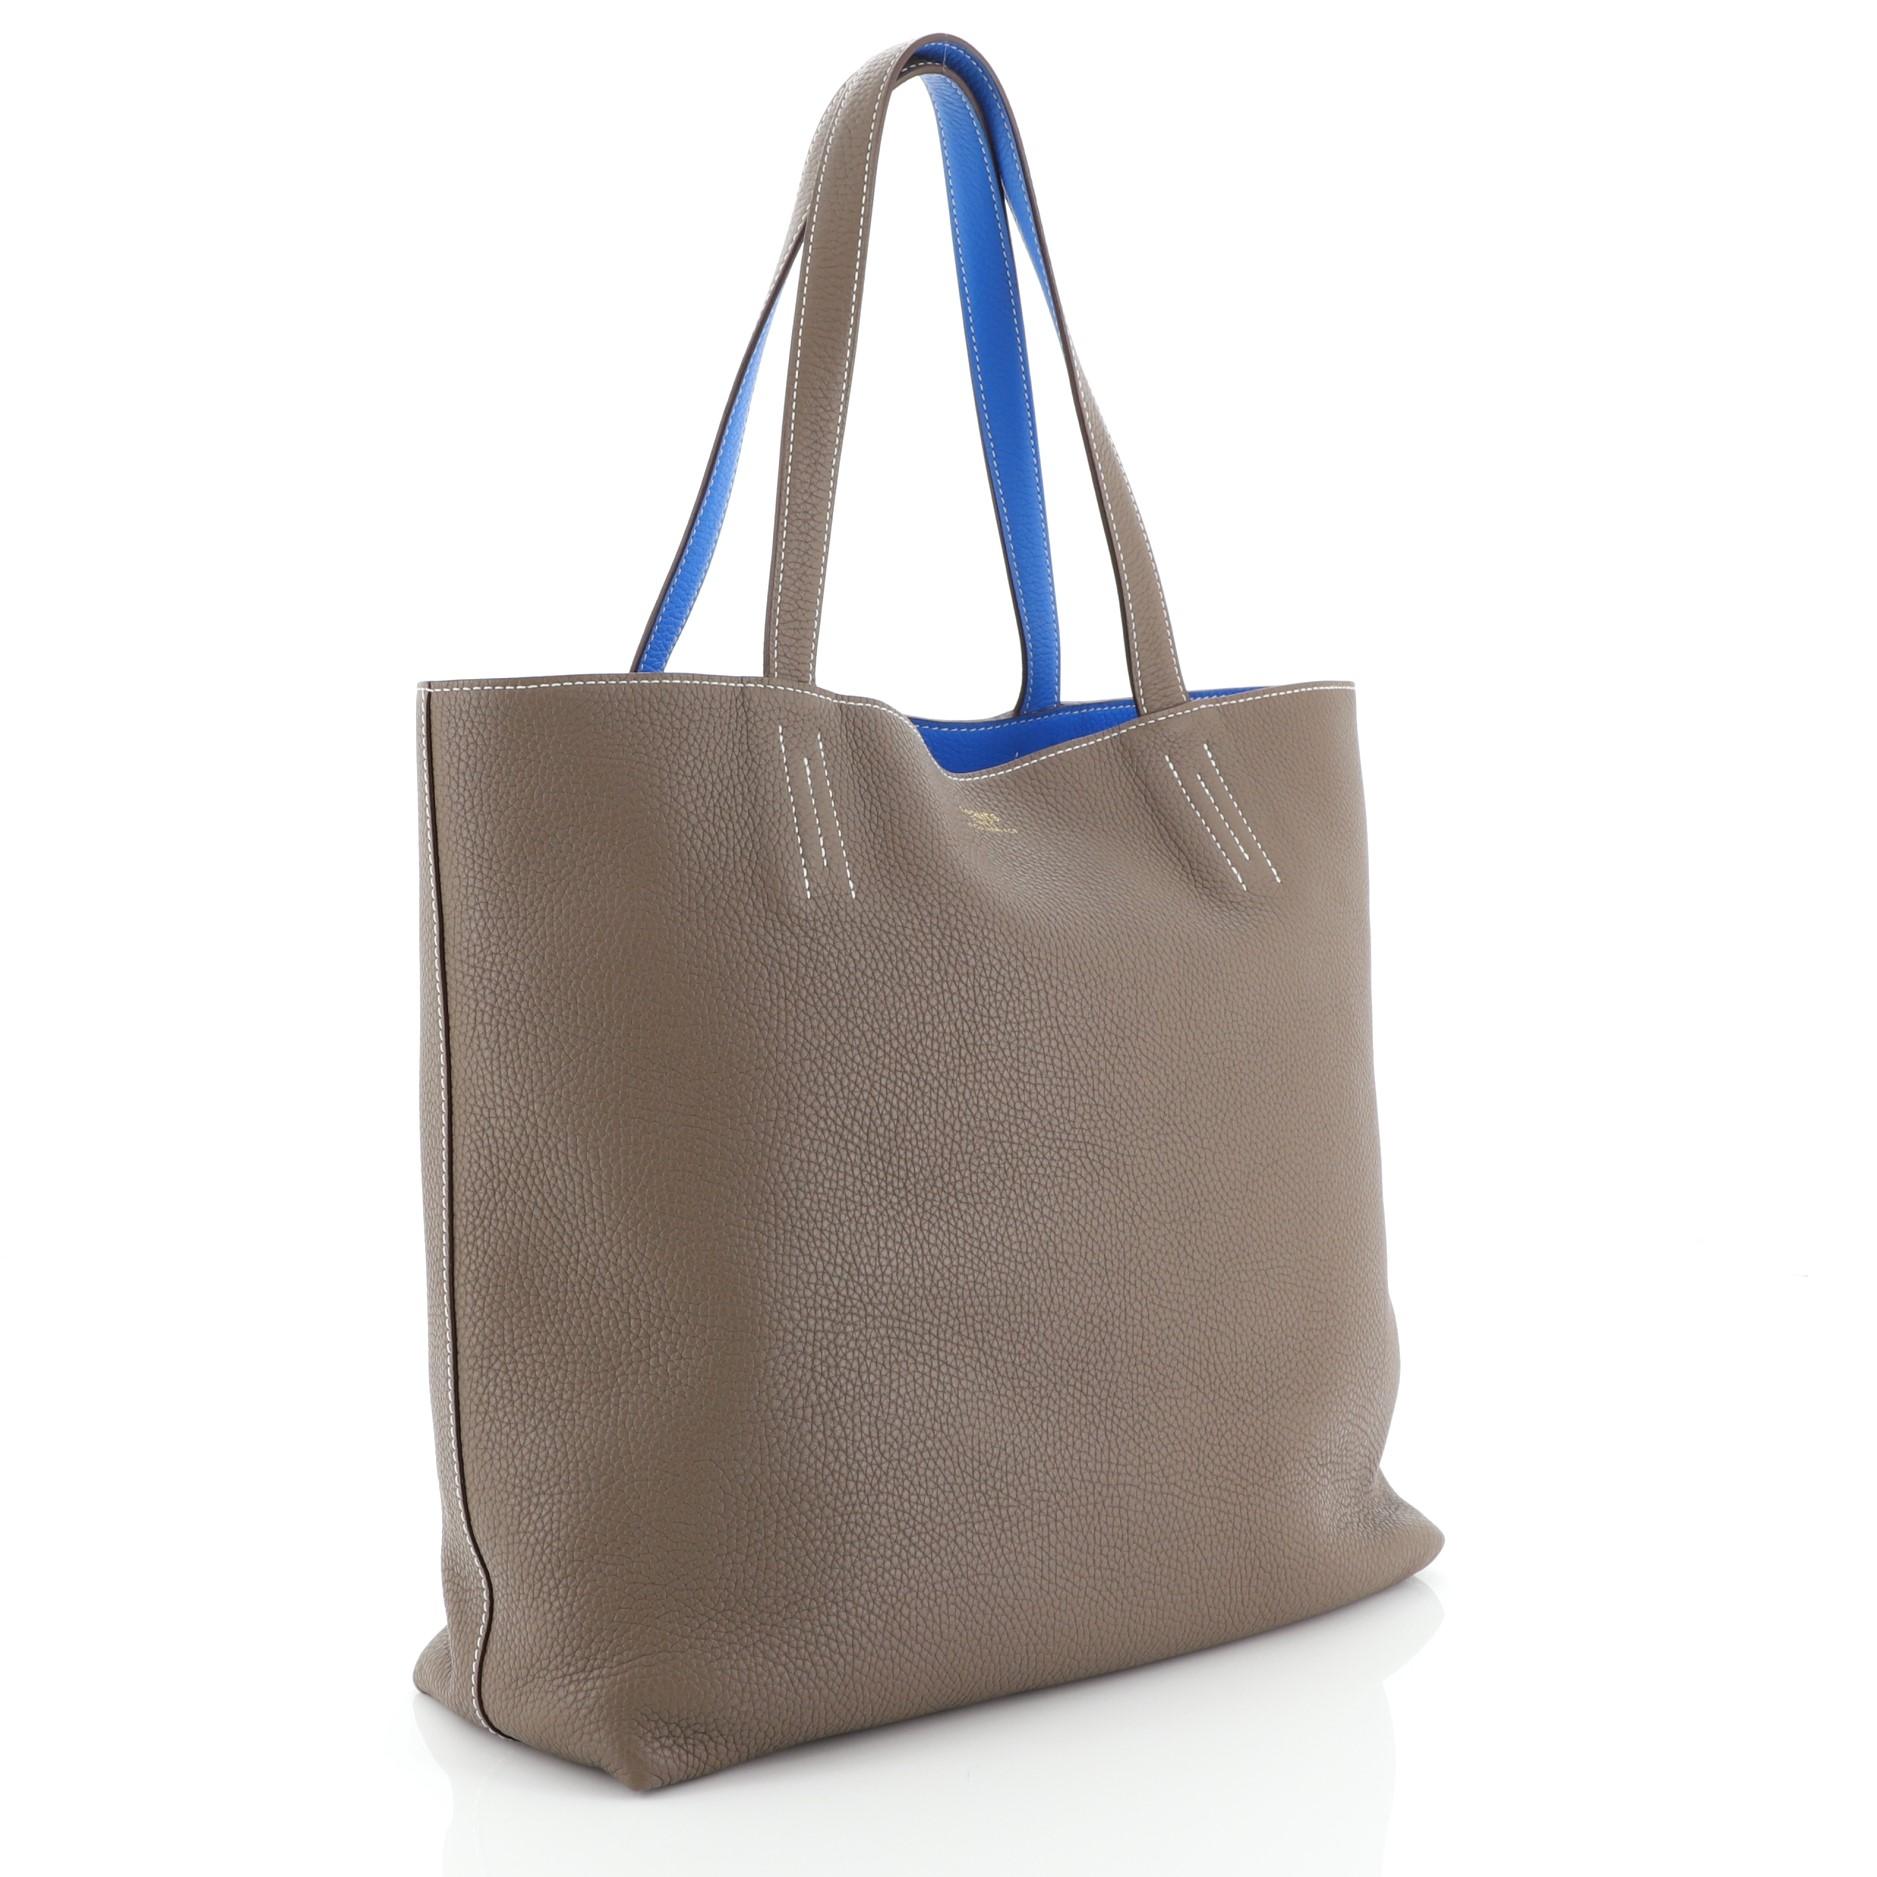 This Hermes Double Sens Tote Clemence 36, crafted from Etoupe neutral Clemence leather, features dual leather straps, all-around contrast stitching, and a stamped Hermes logo. Its wide open top showcases a Bleu Hydra blue Clemence leather interior.